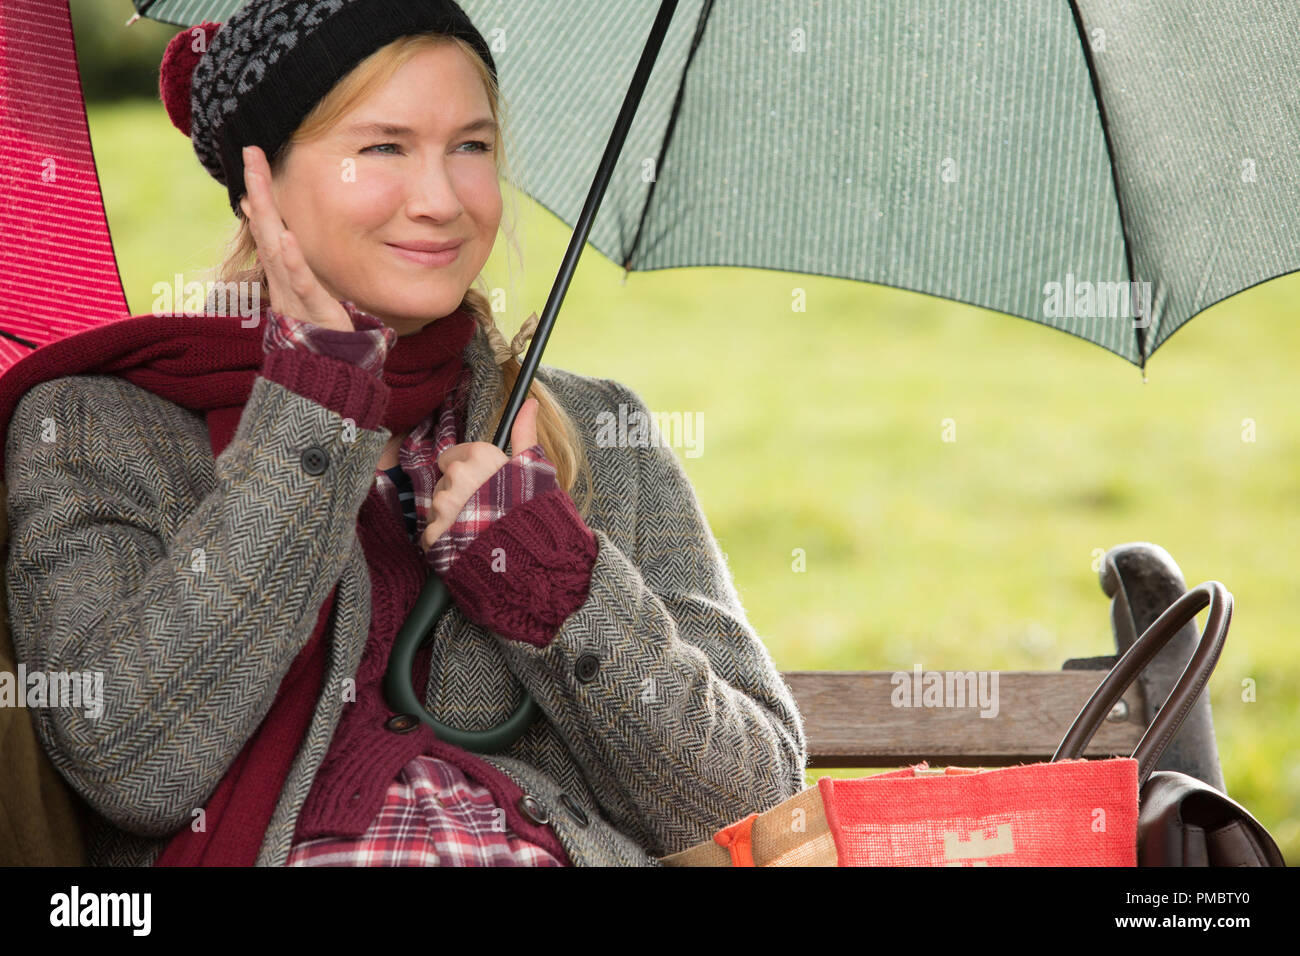 Oscar® winner RENÉE ZELLWEGER reprises her role in the next chapter of the world’s favorite singleton in 'Bridget Jones’s Baby.' Directed by Sharon Maguire (Bridget Jones’s Diary), the new film in the beloved comedy series based on creator Helen Fielding’s heroine finds Bridget unexpectedly expecting. Stock Photo